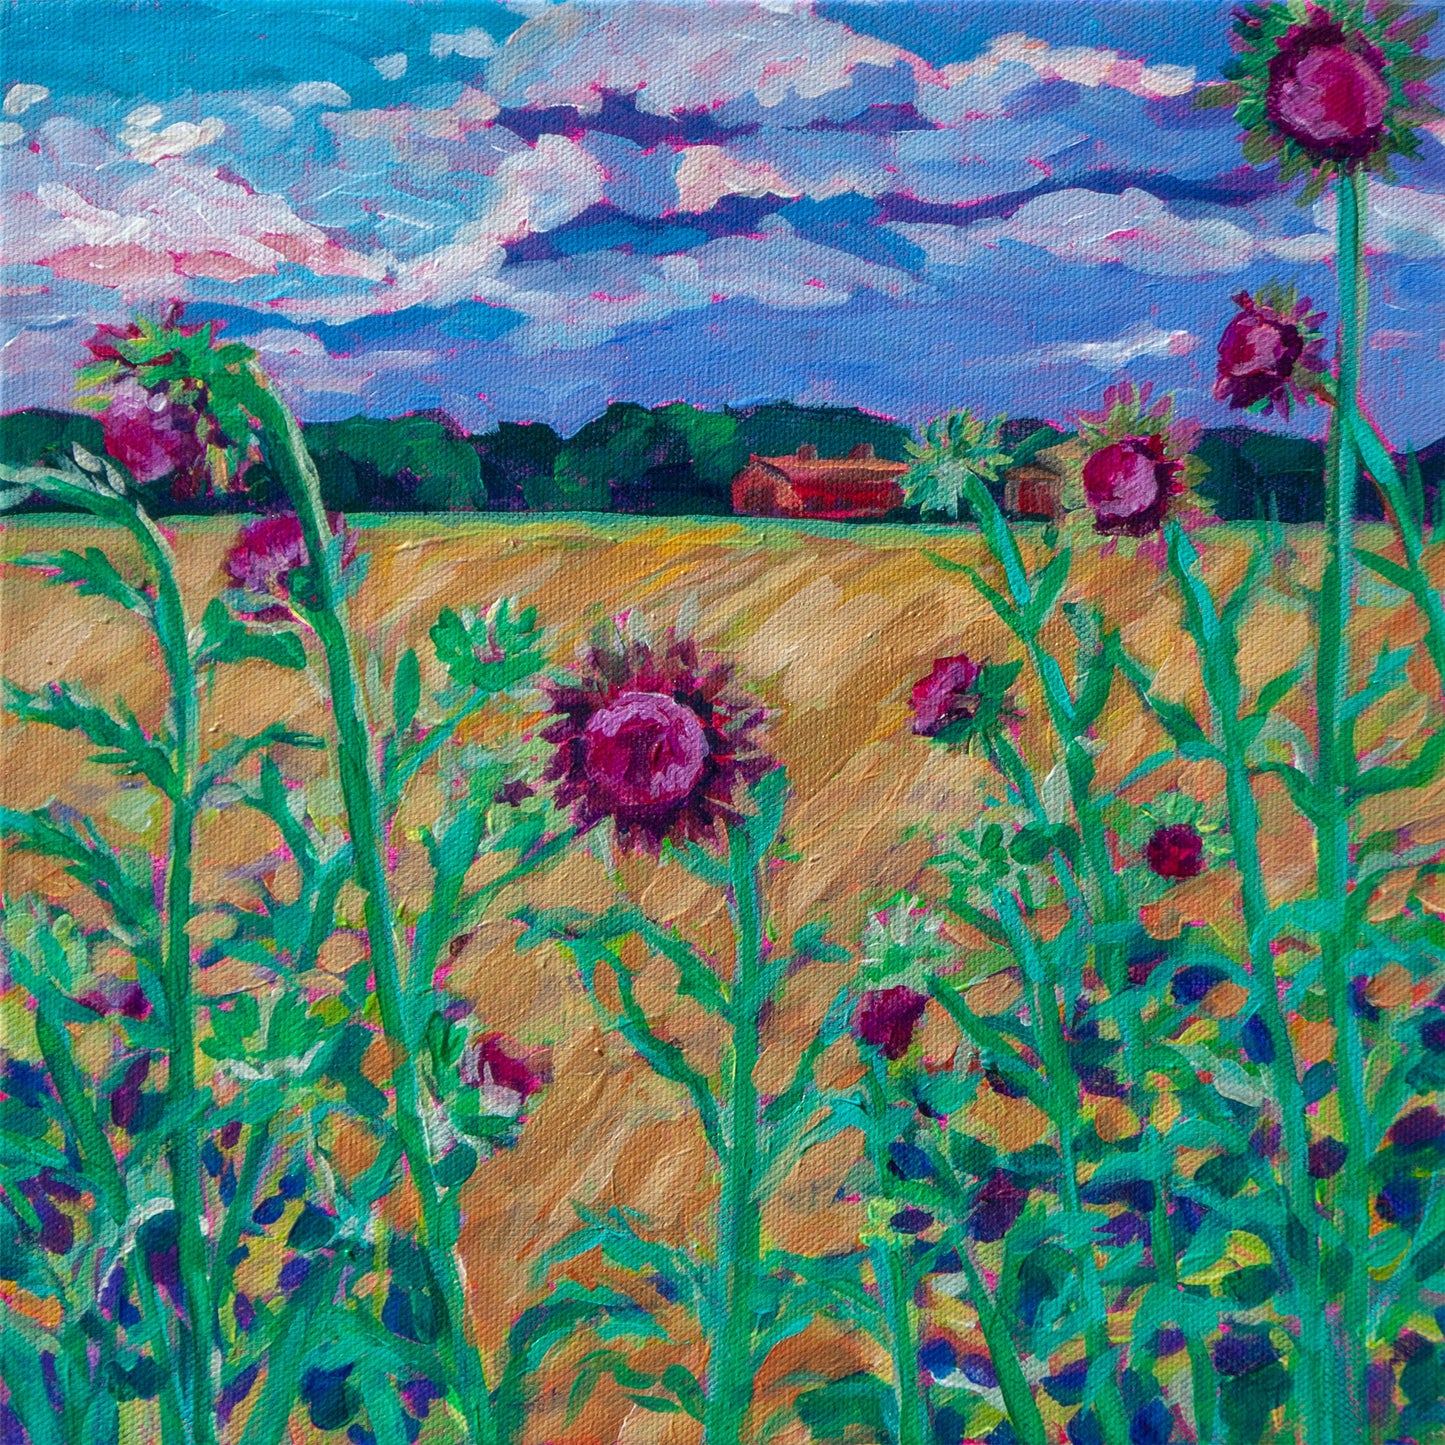 painting of farmland with dramatic skies in impressionistic style with thistles inspired by farms in southern Michigan